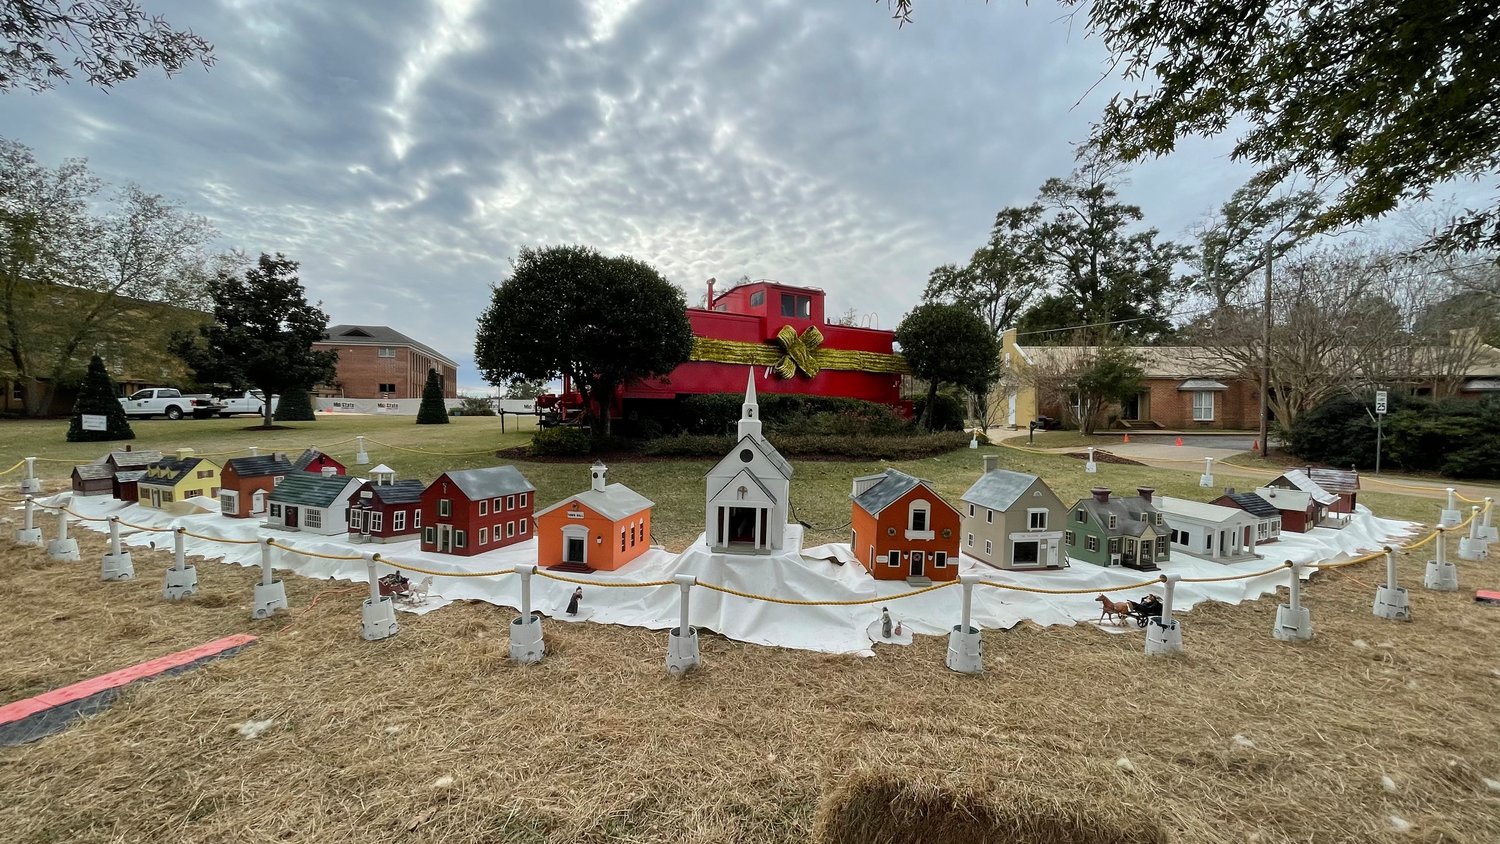 The Madison Christmas Village is on display in front of the Red Caboose on Main Street.